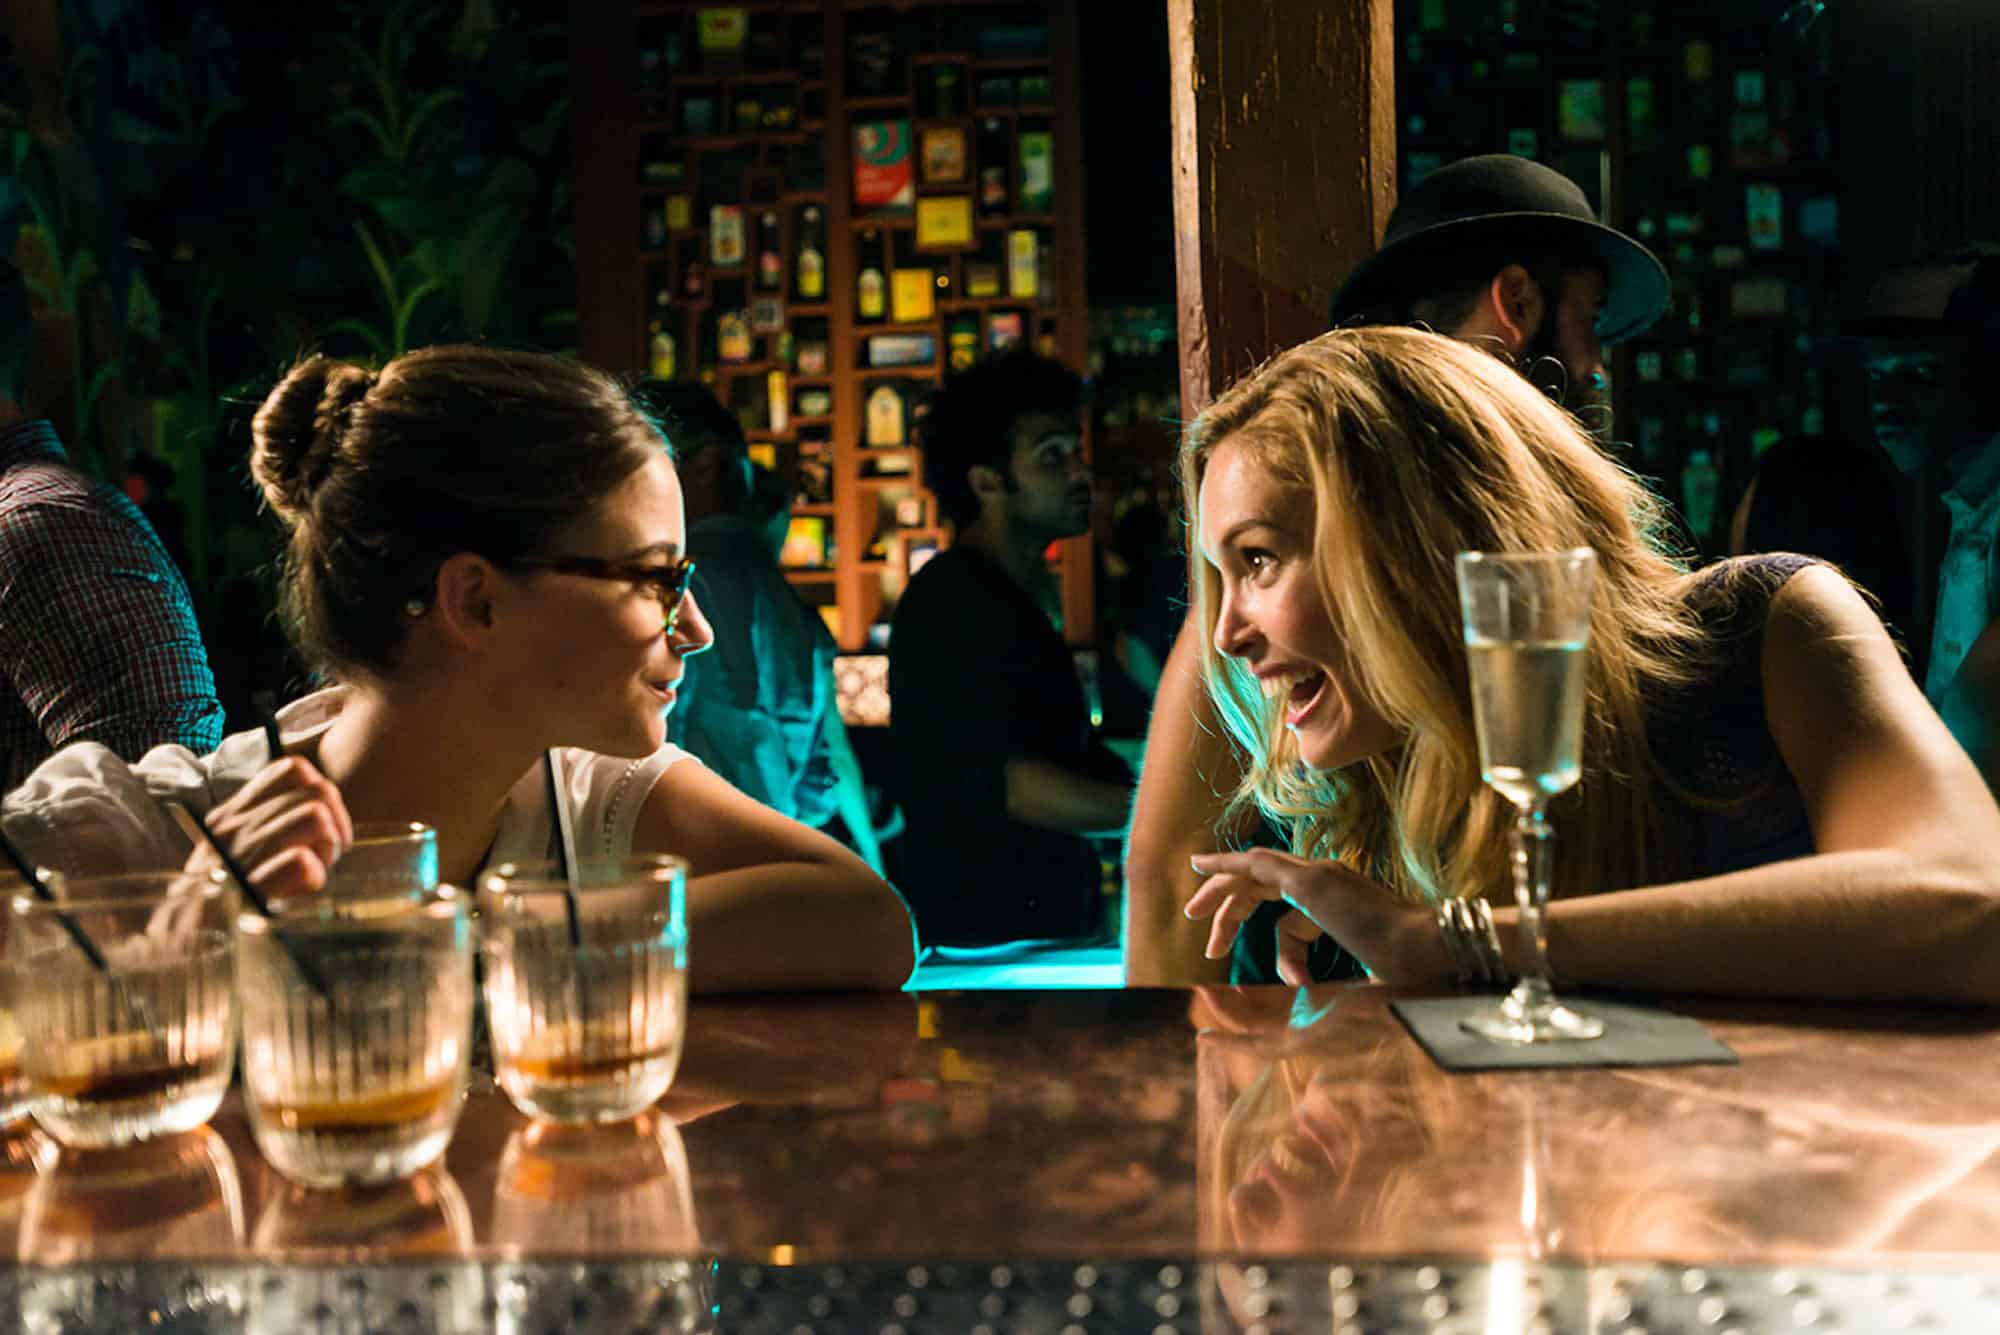 A still from the film 'Blind Date' with two women having drinks at the counter of a bar and chatting.